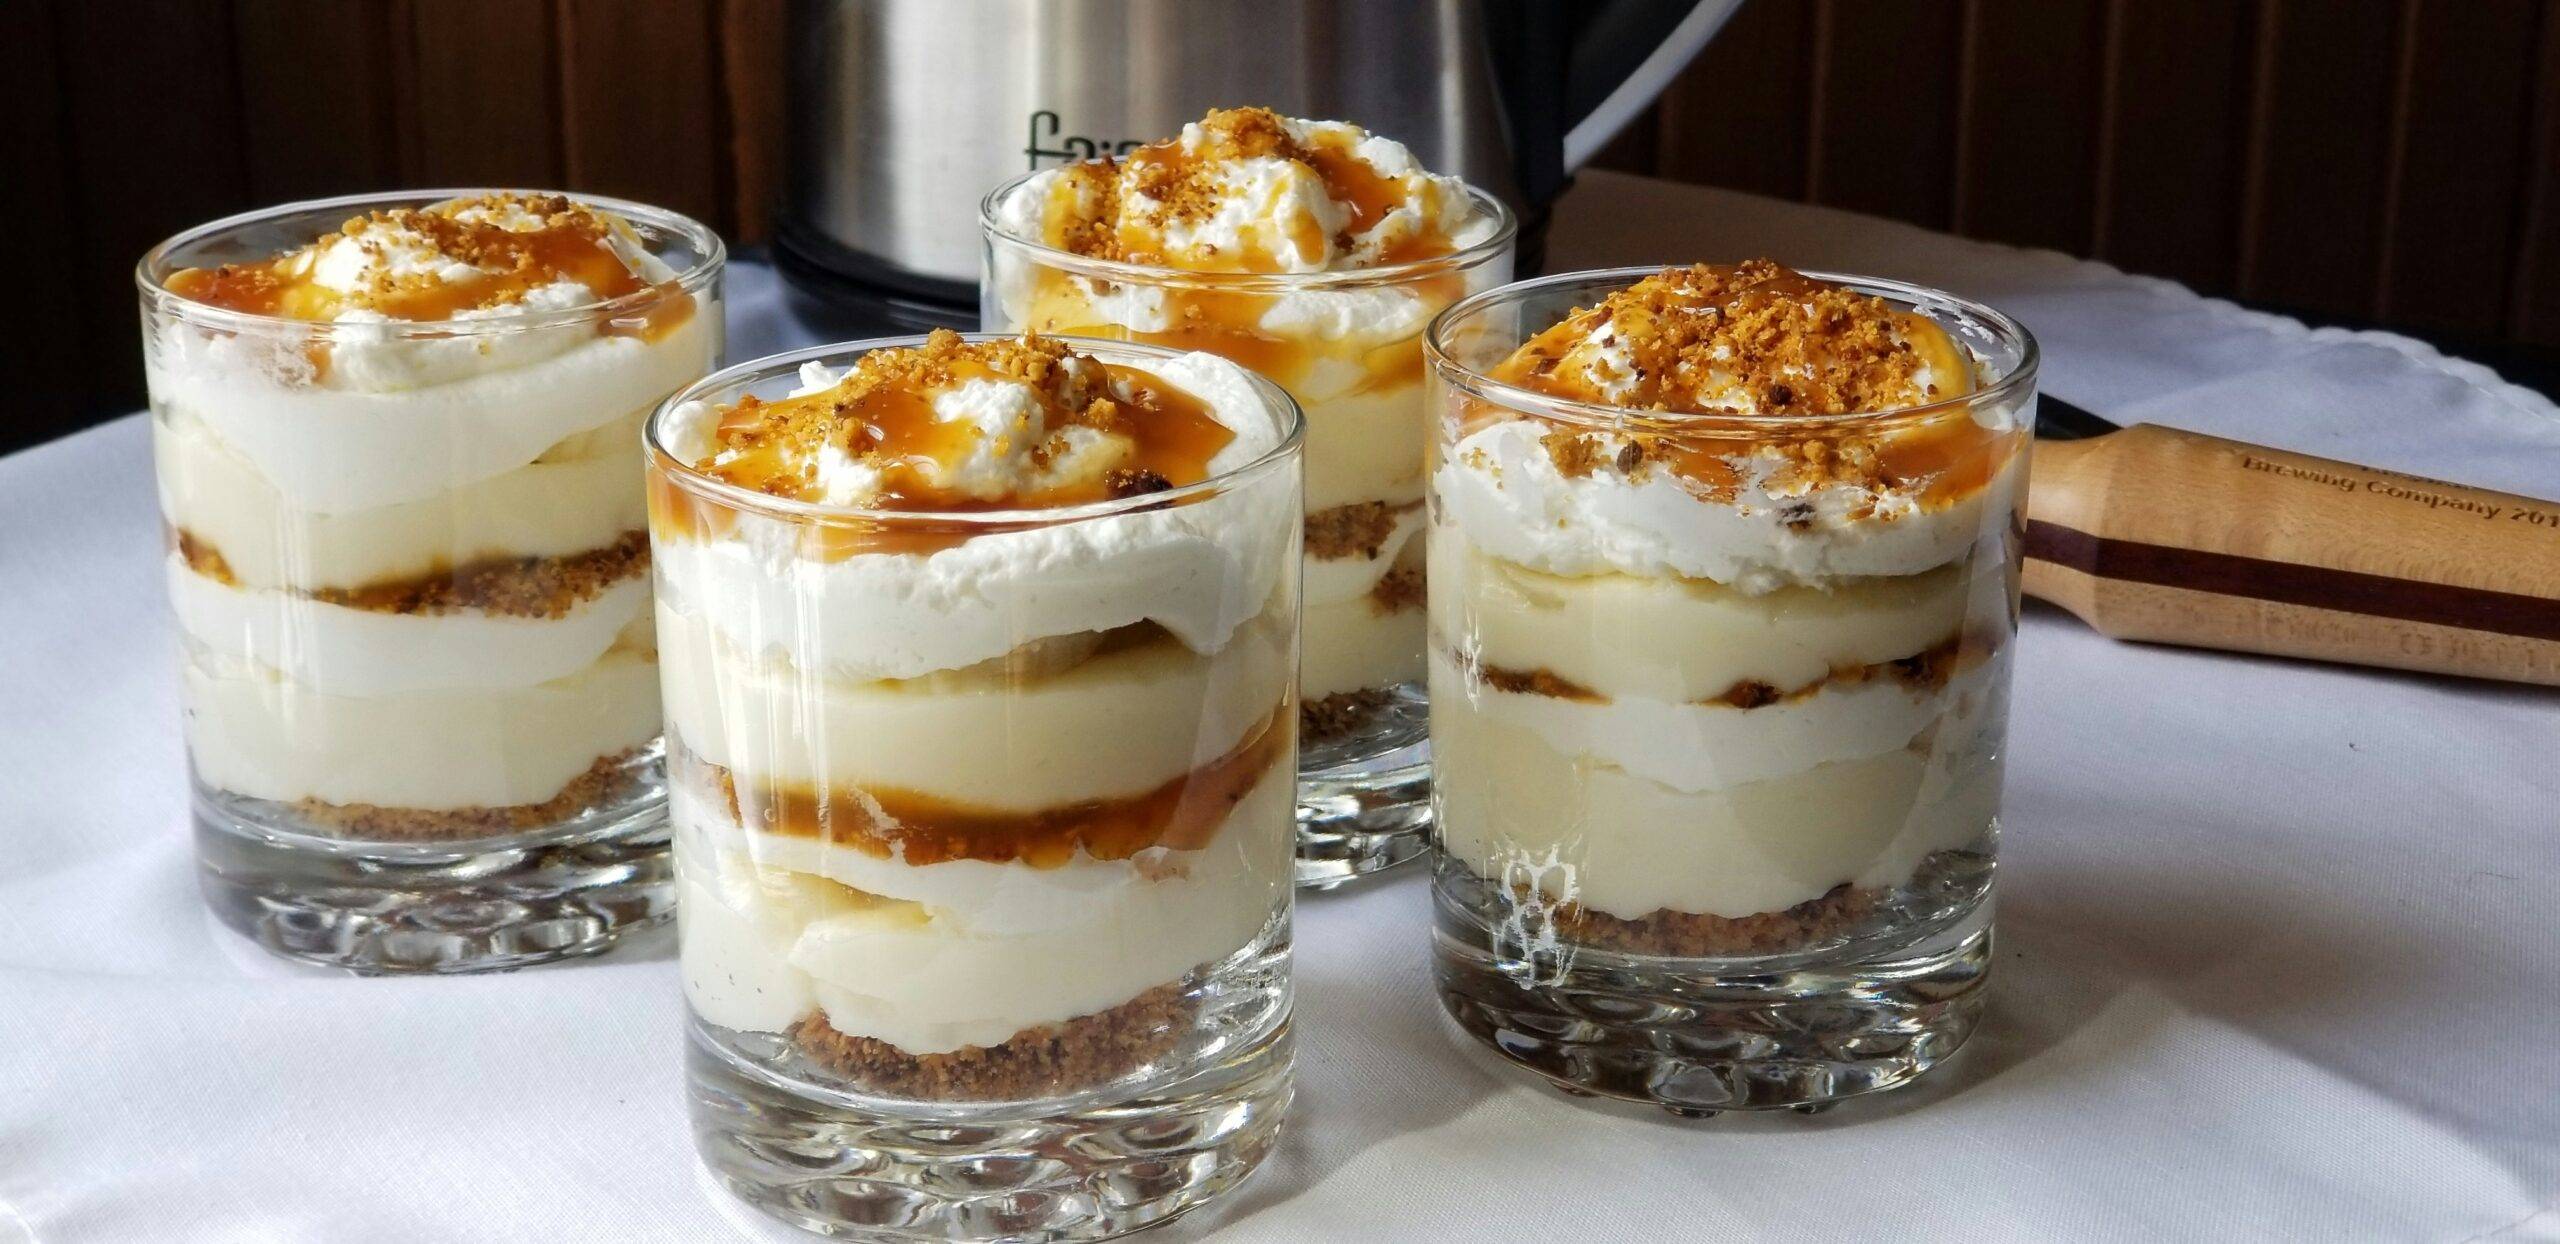 Amazing Banana Pudding: A Sweet Slice of American Tradition